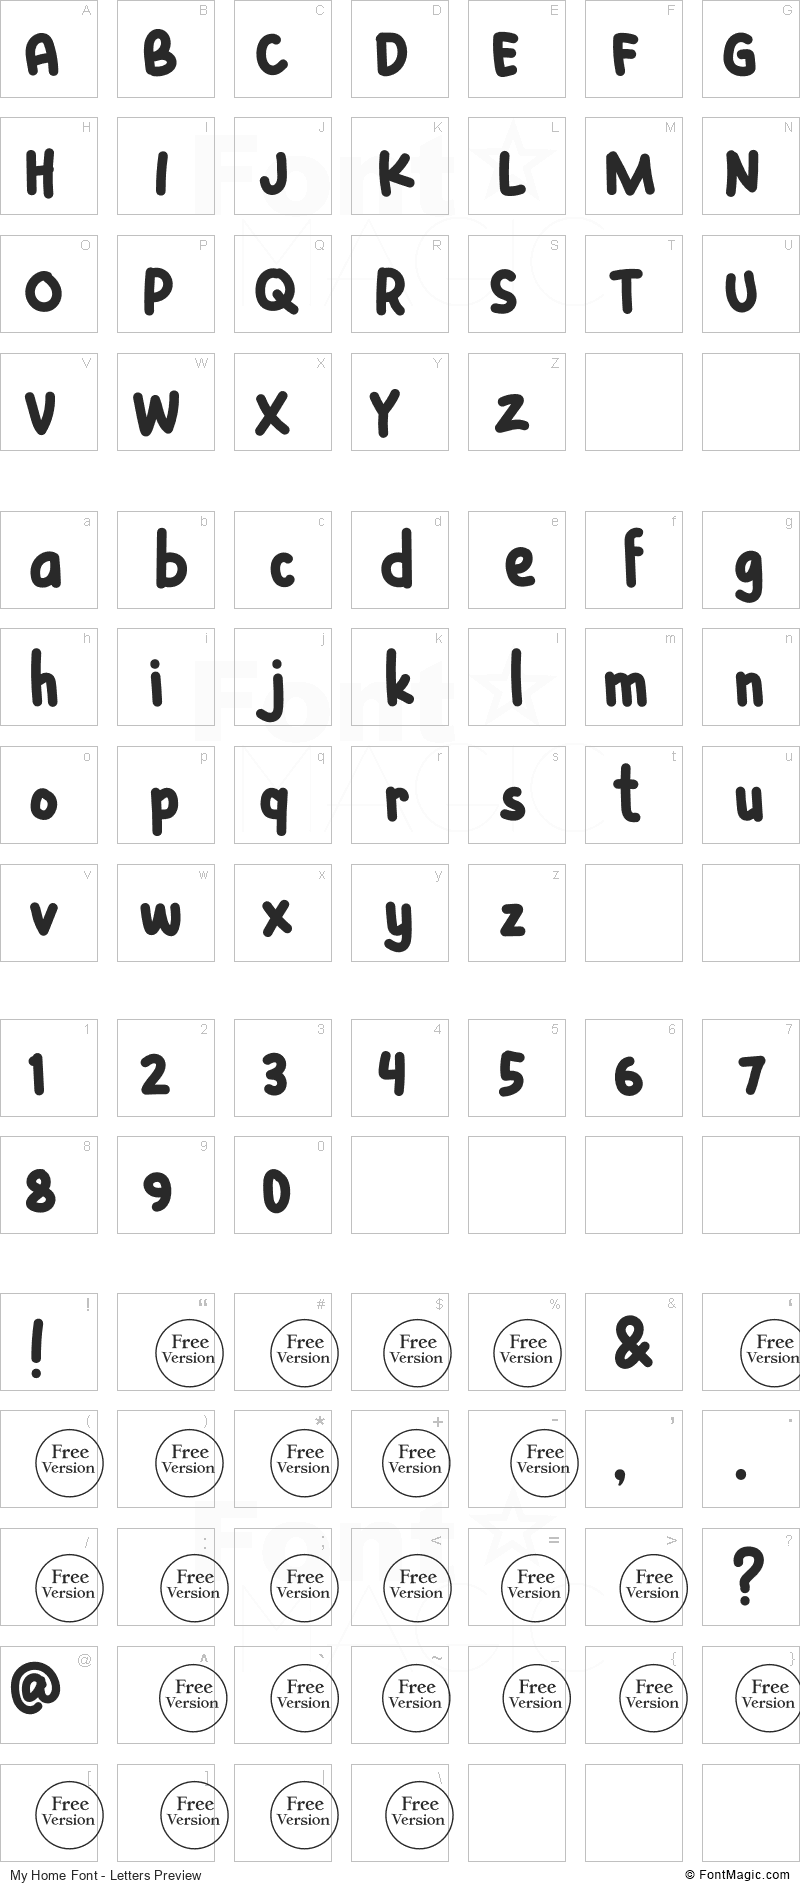 My Home Font - All Latters Preview Chart